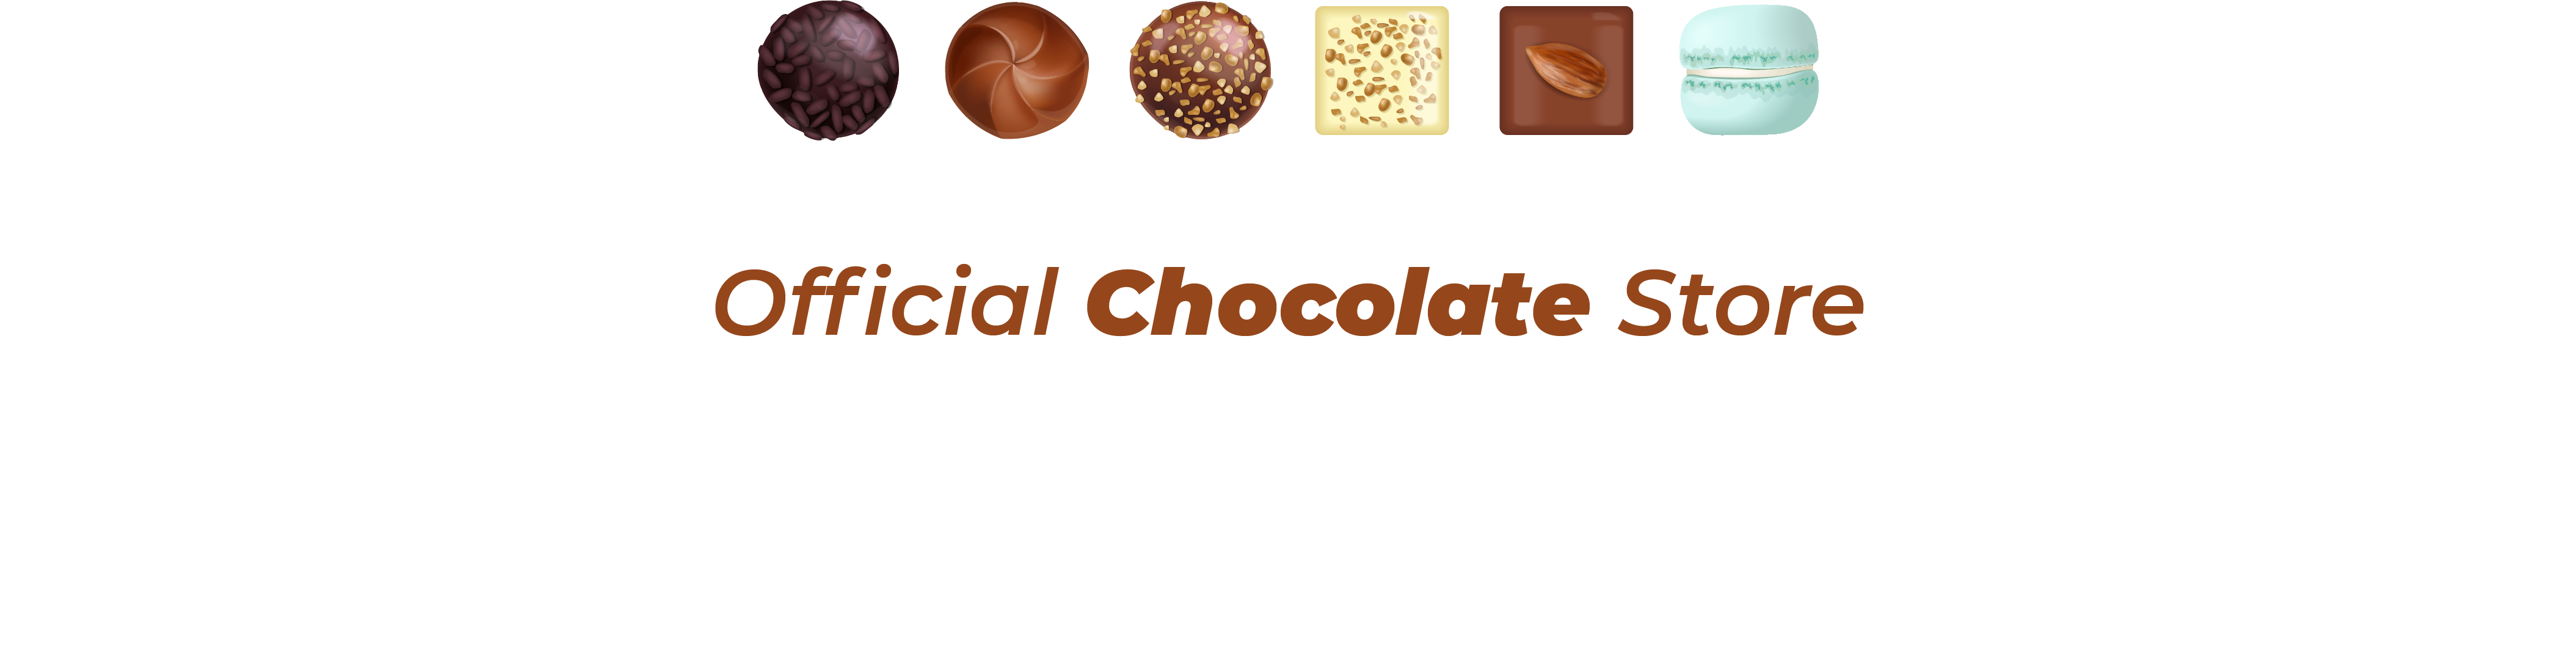 Official Chocolate Store